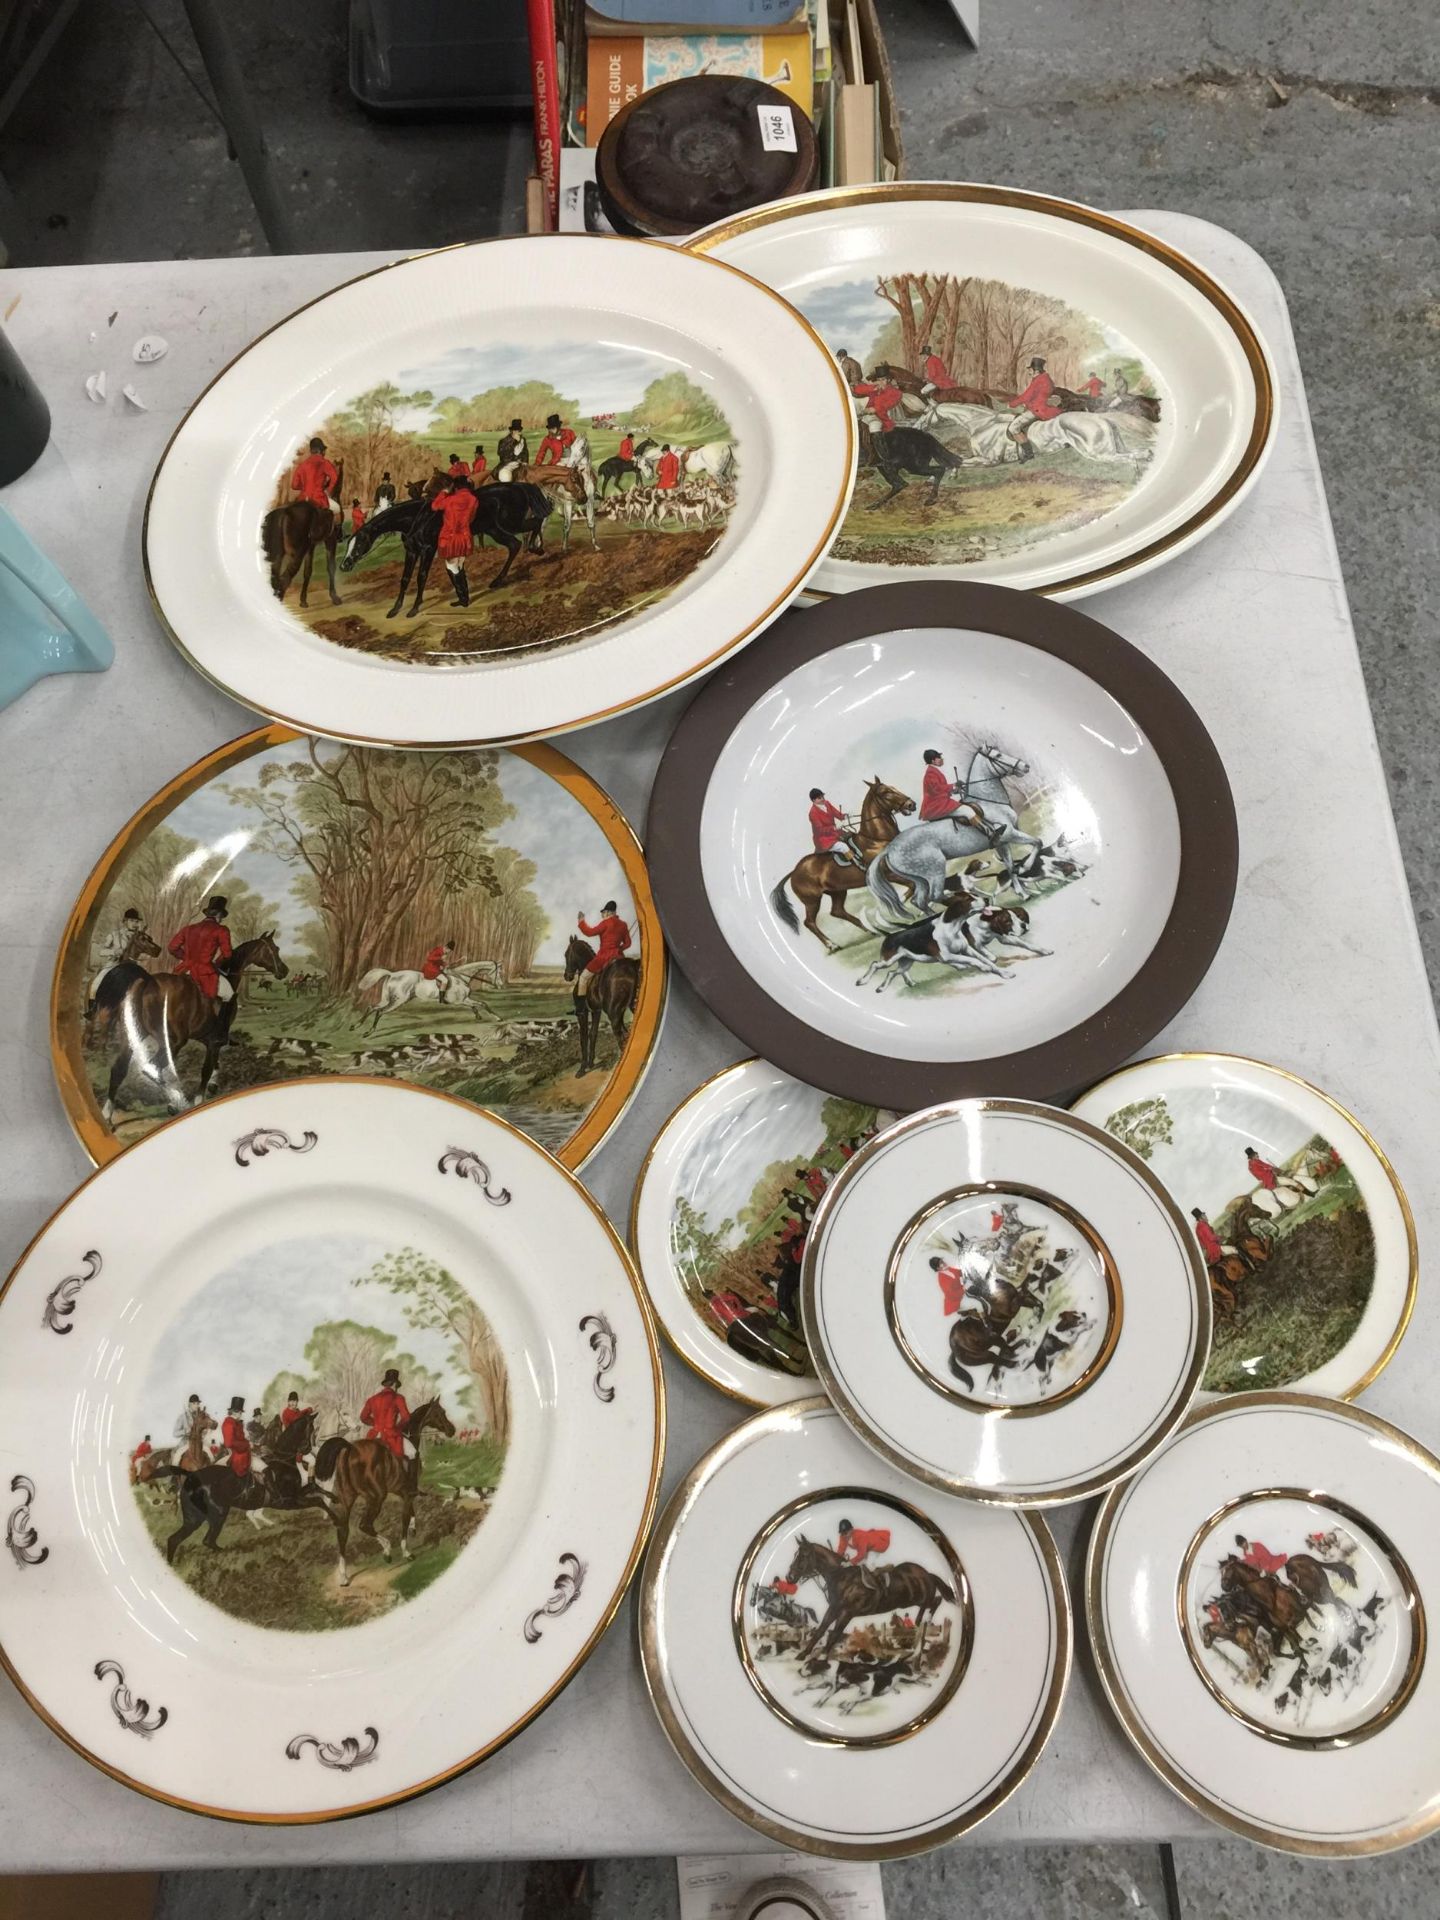 A COLLECTION OF VARIOUS SIZED HUNTING THEMED PLATES - 11 IN TOTAL